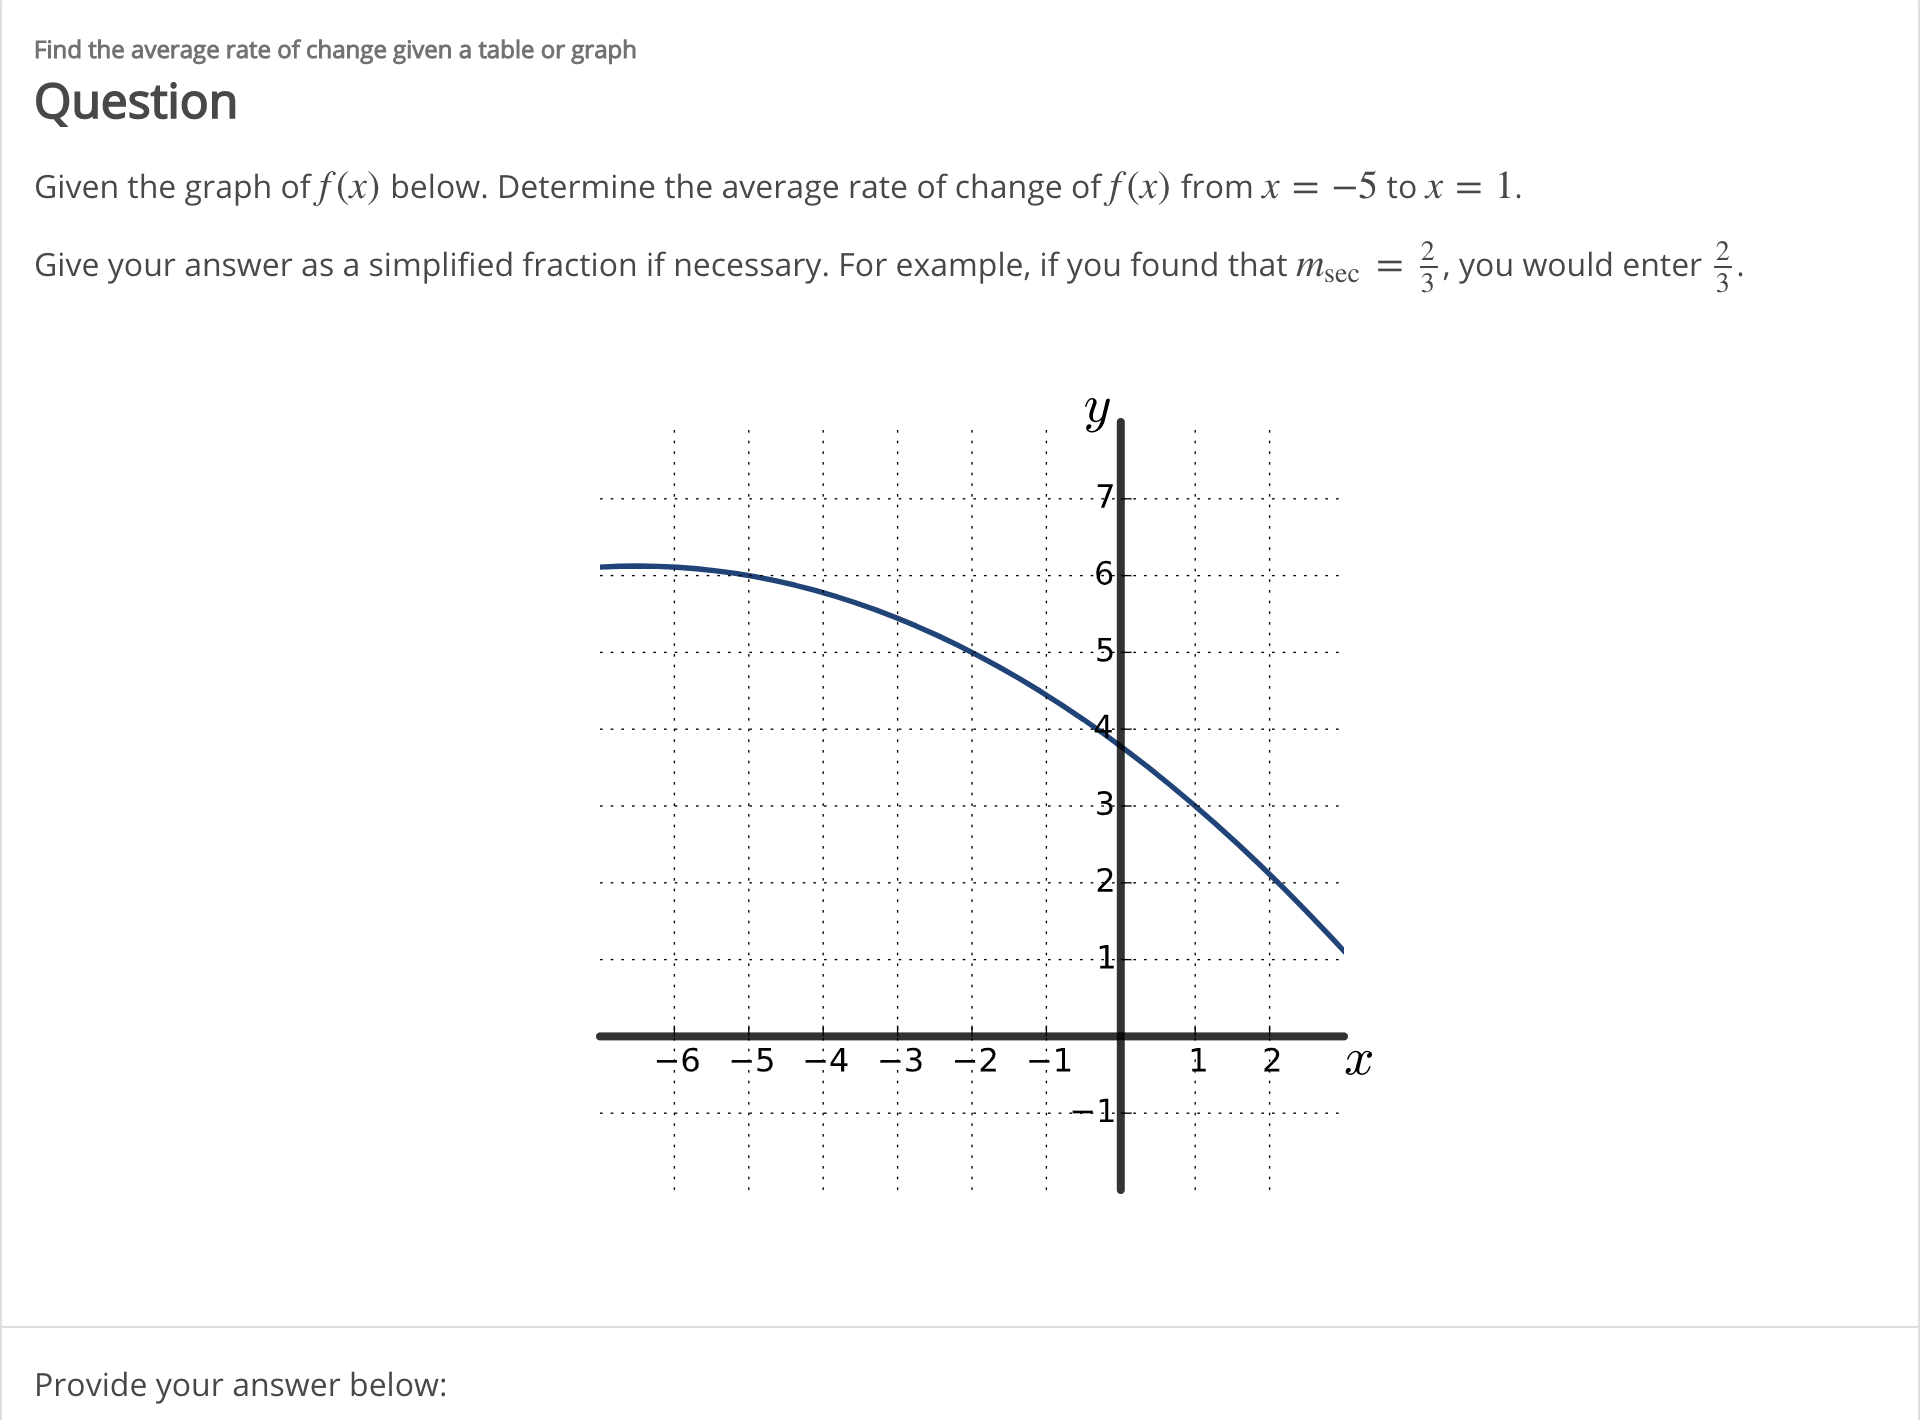 Find the average rate of change given a table or graph
Question
-5 to x
1
Given the graph of f(x) below. Determine the average rate of change of f(x) from x =
Give your answer as a simplified fraction if necessary. For example, if you found that msec = , you would enter.
y
7
6
5
3
2
-6 5-4 3 2 1
1
2
-1
Provide your answer below:
LO
